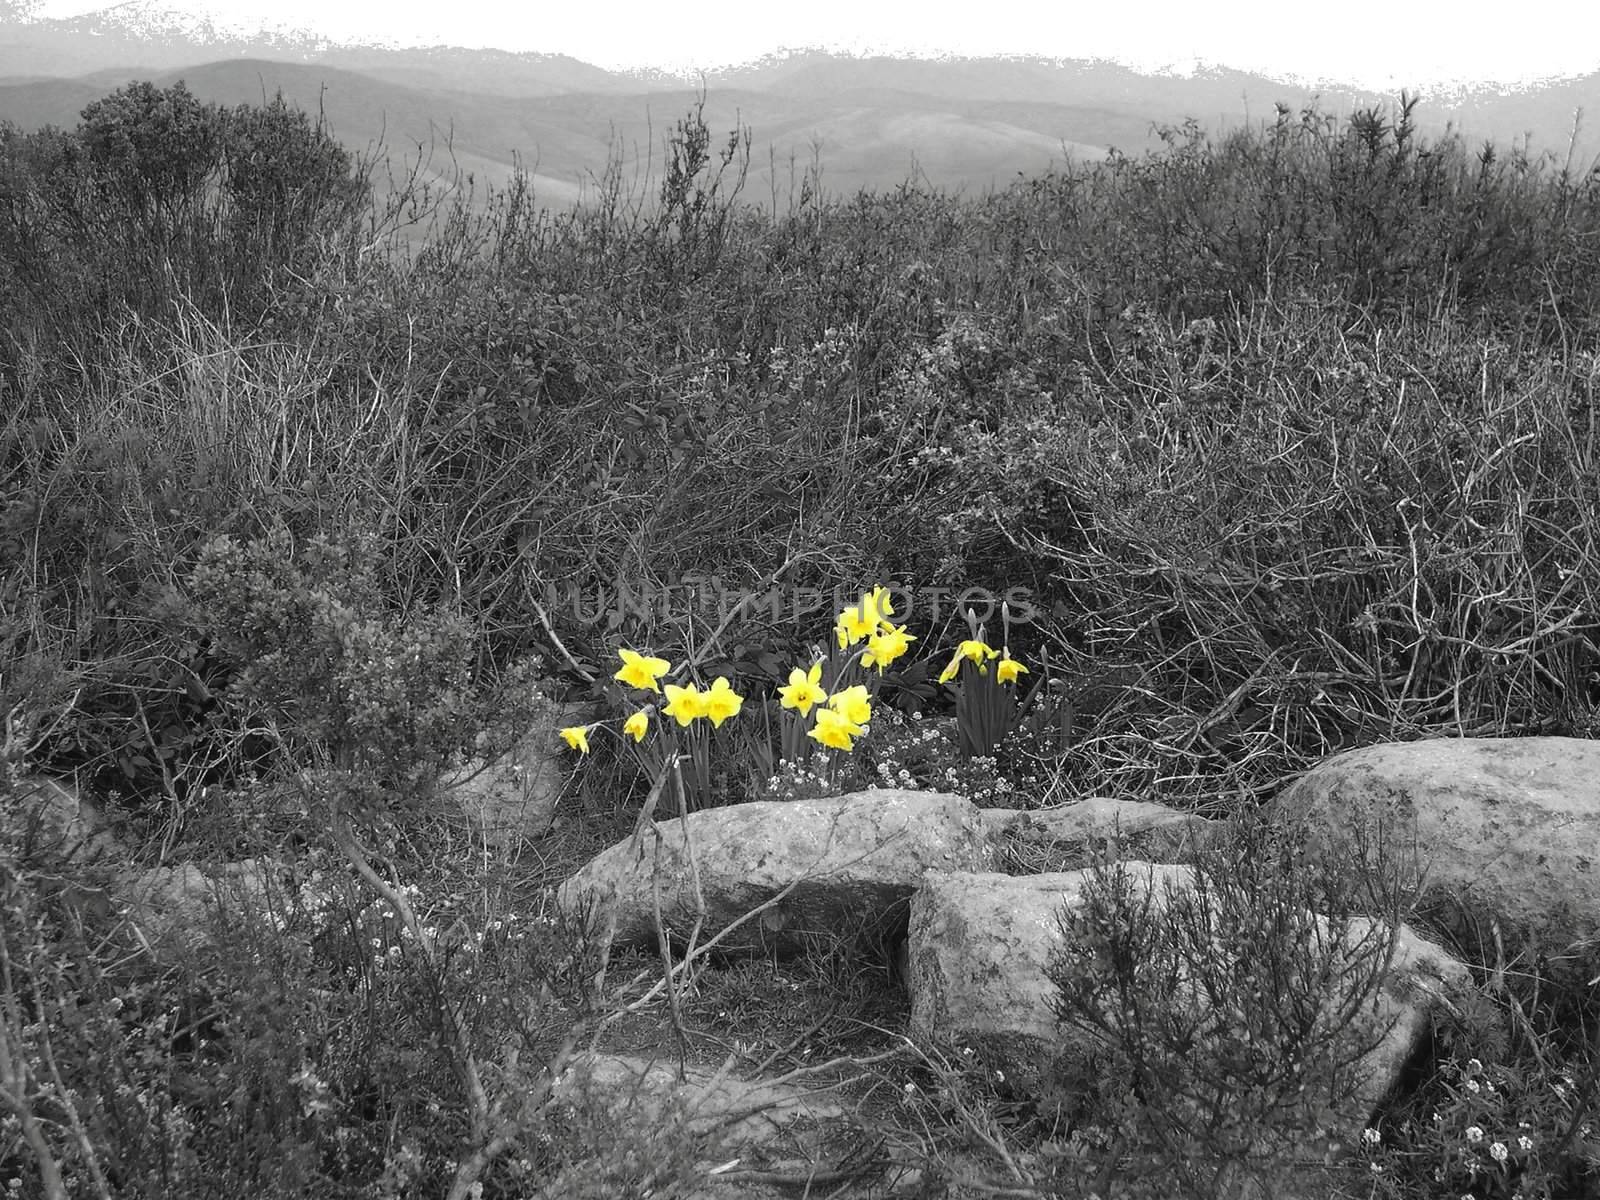 grayscale photo of flowers, flowers have been returned to original color in photoshop